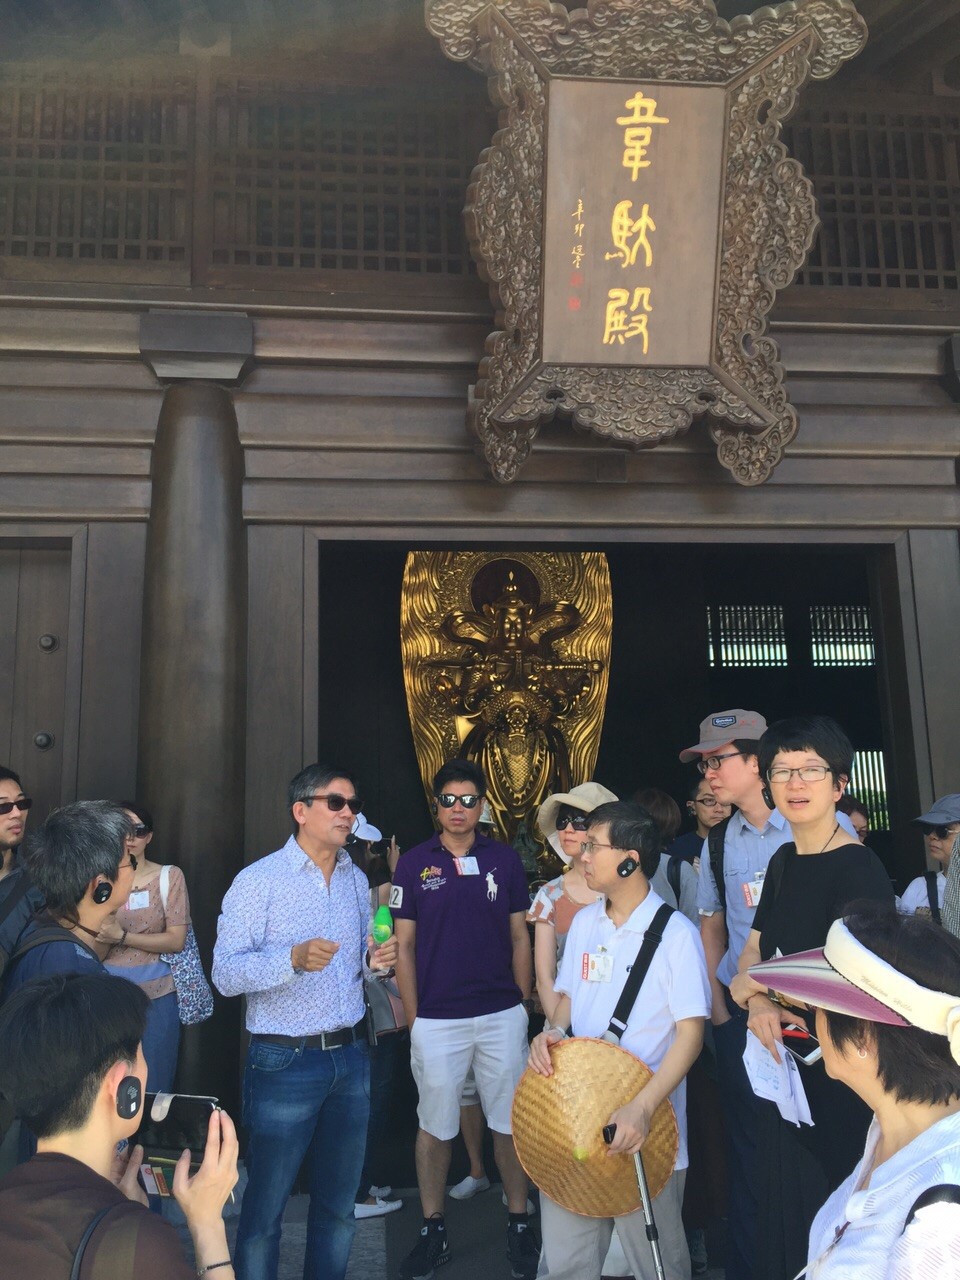 Prof Ho, explaining to visitors the design intricacies of a hall (韦驮殿) within Tsz Shan Monastery (慈山寺) in Hong Kong, which he was in charge of designing.